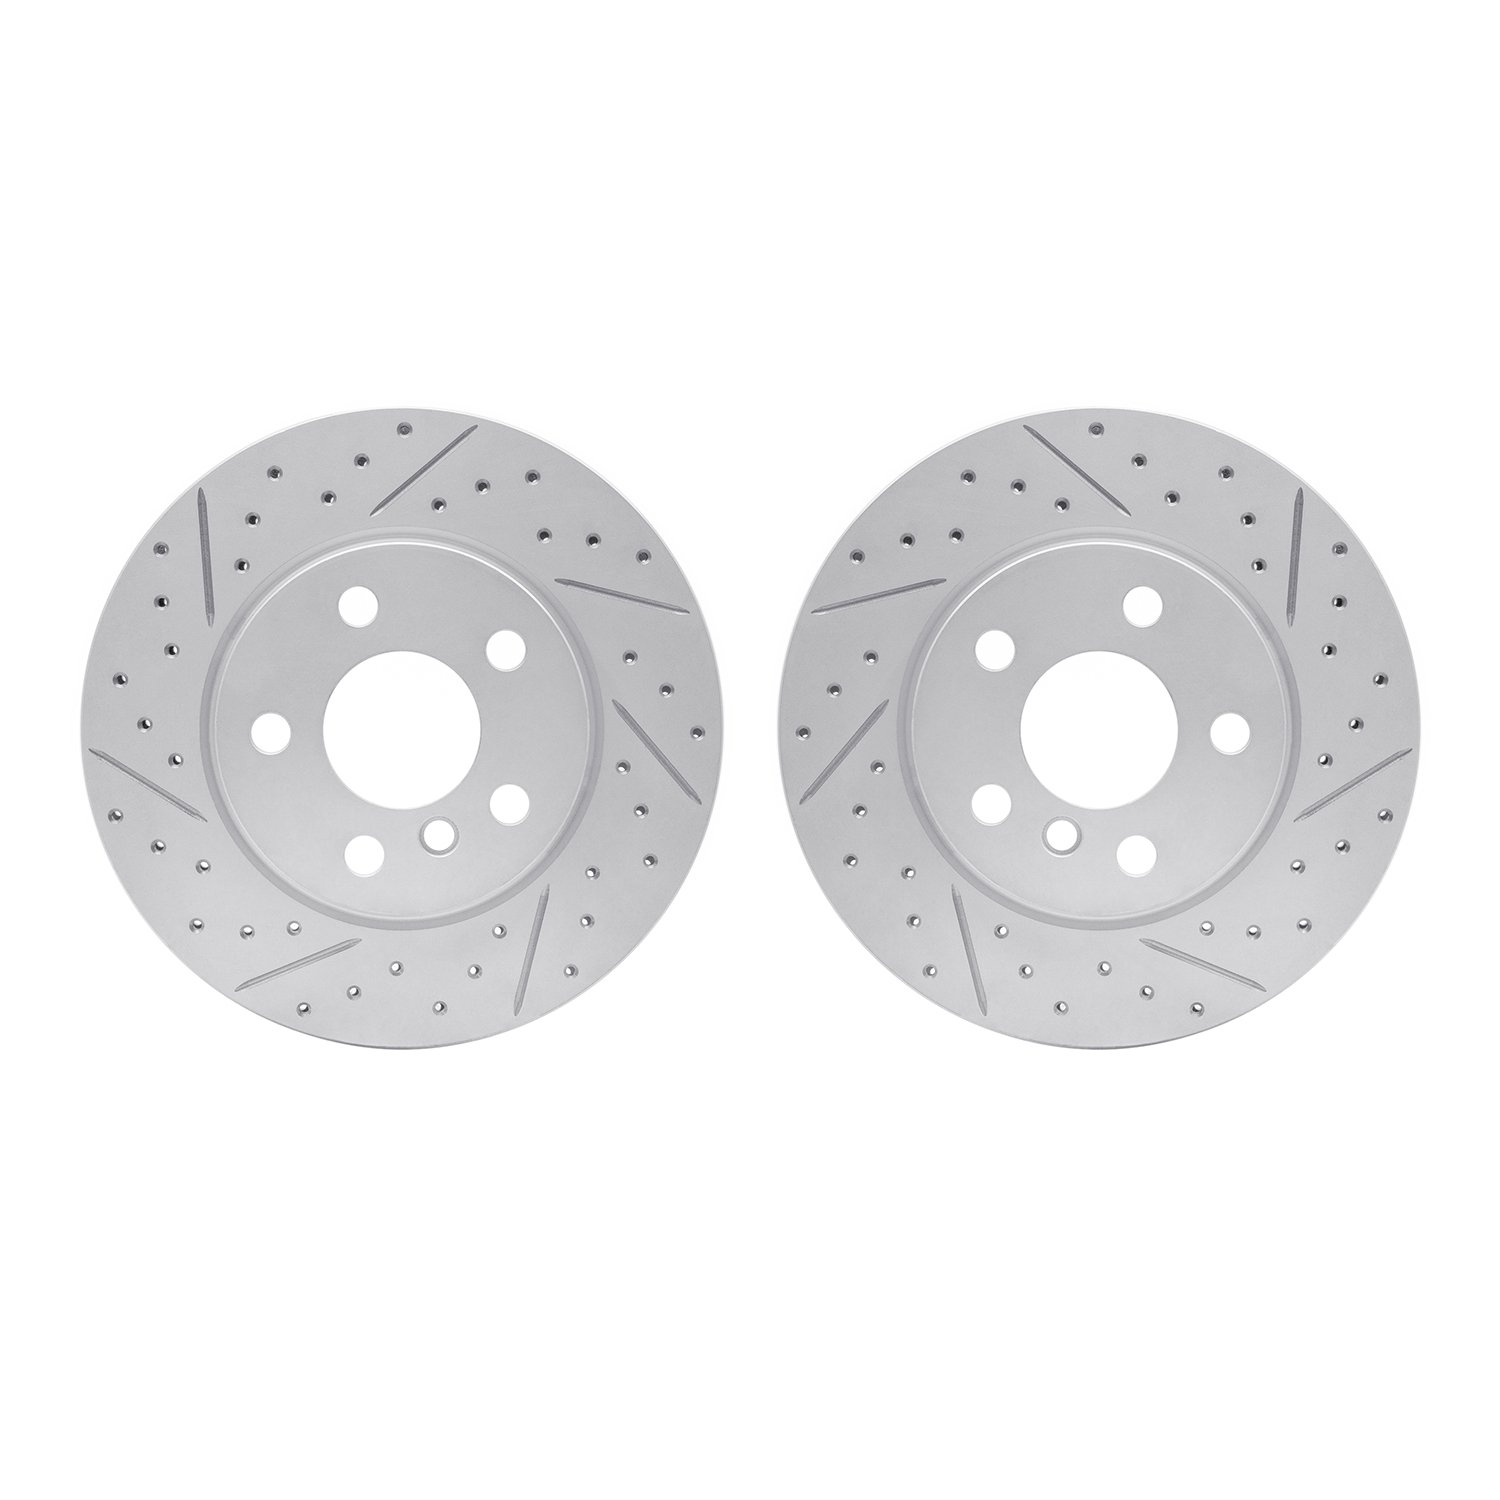 2002-32007 Geoperformance Drilled/Slotted Brake Rotors, Fits Select Mini, Position: Front